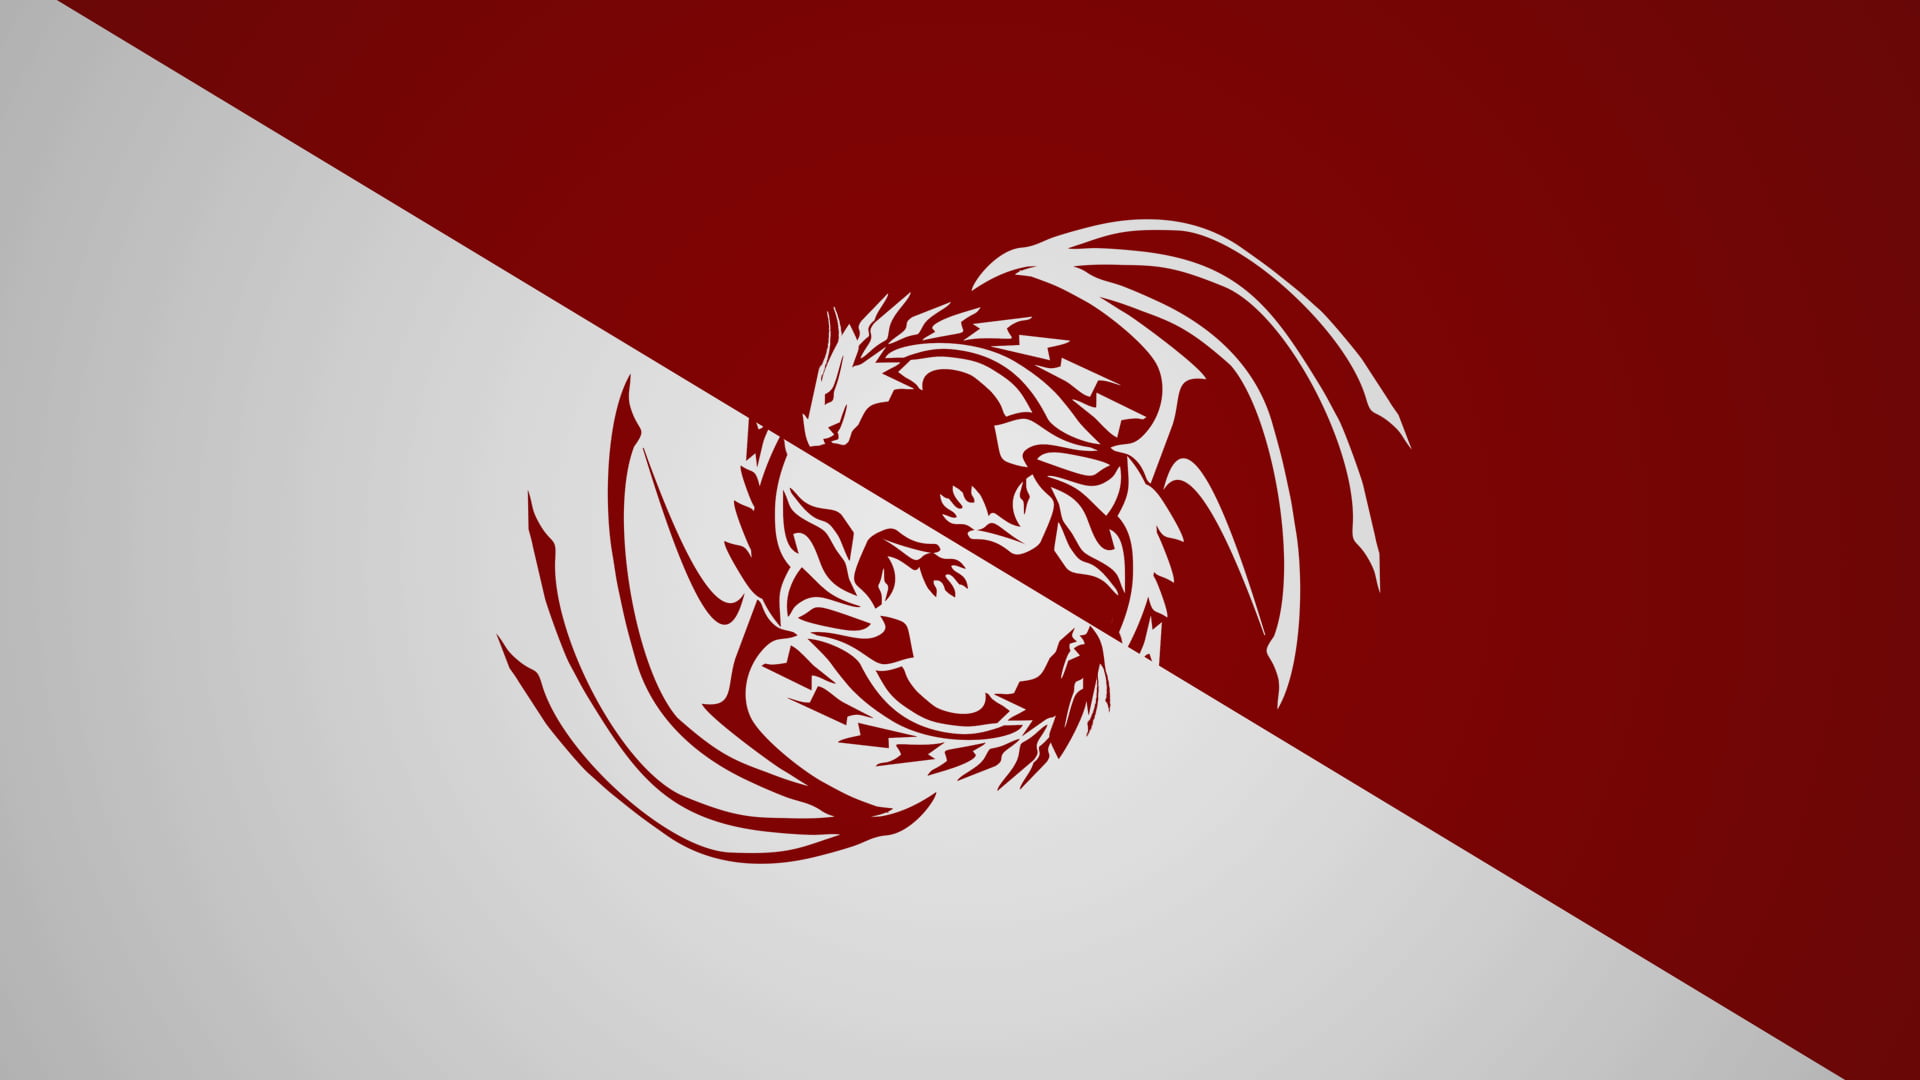 red and white inverted dragon logo, dragon, Ying Yang, Yin and Yang, red